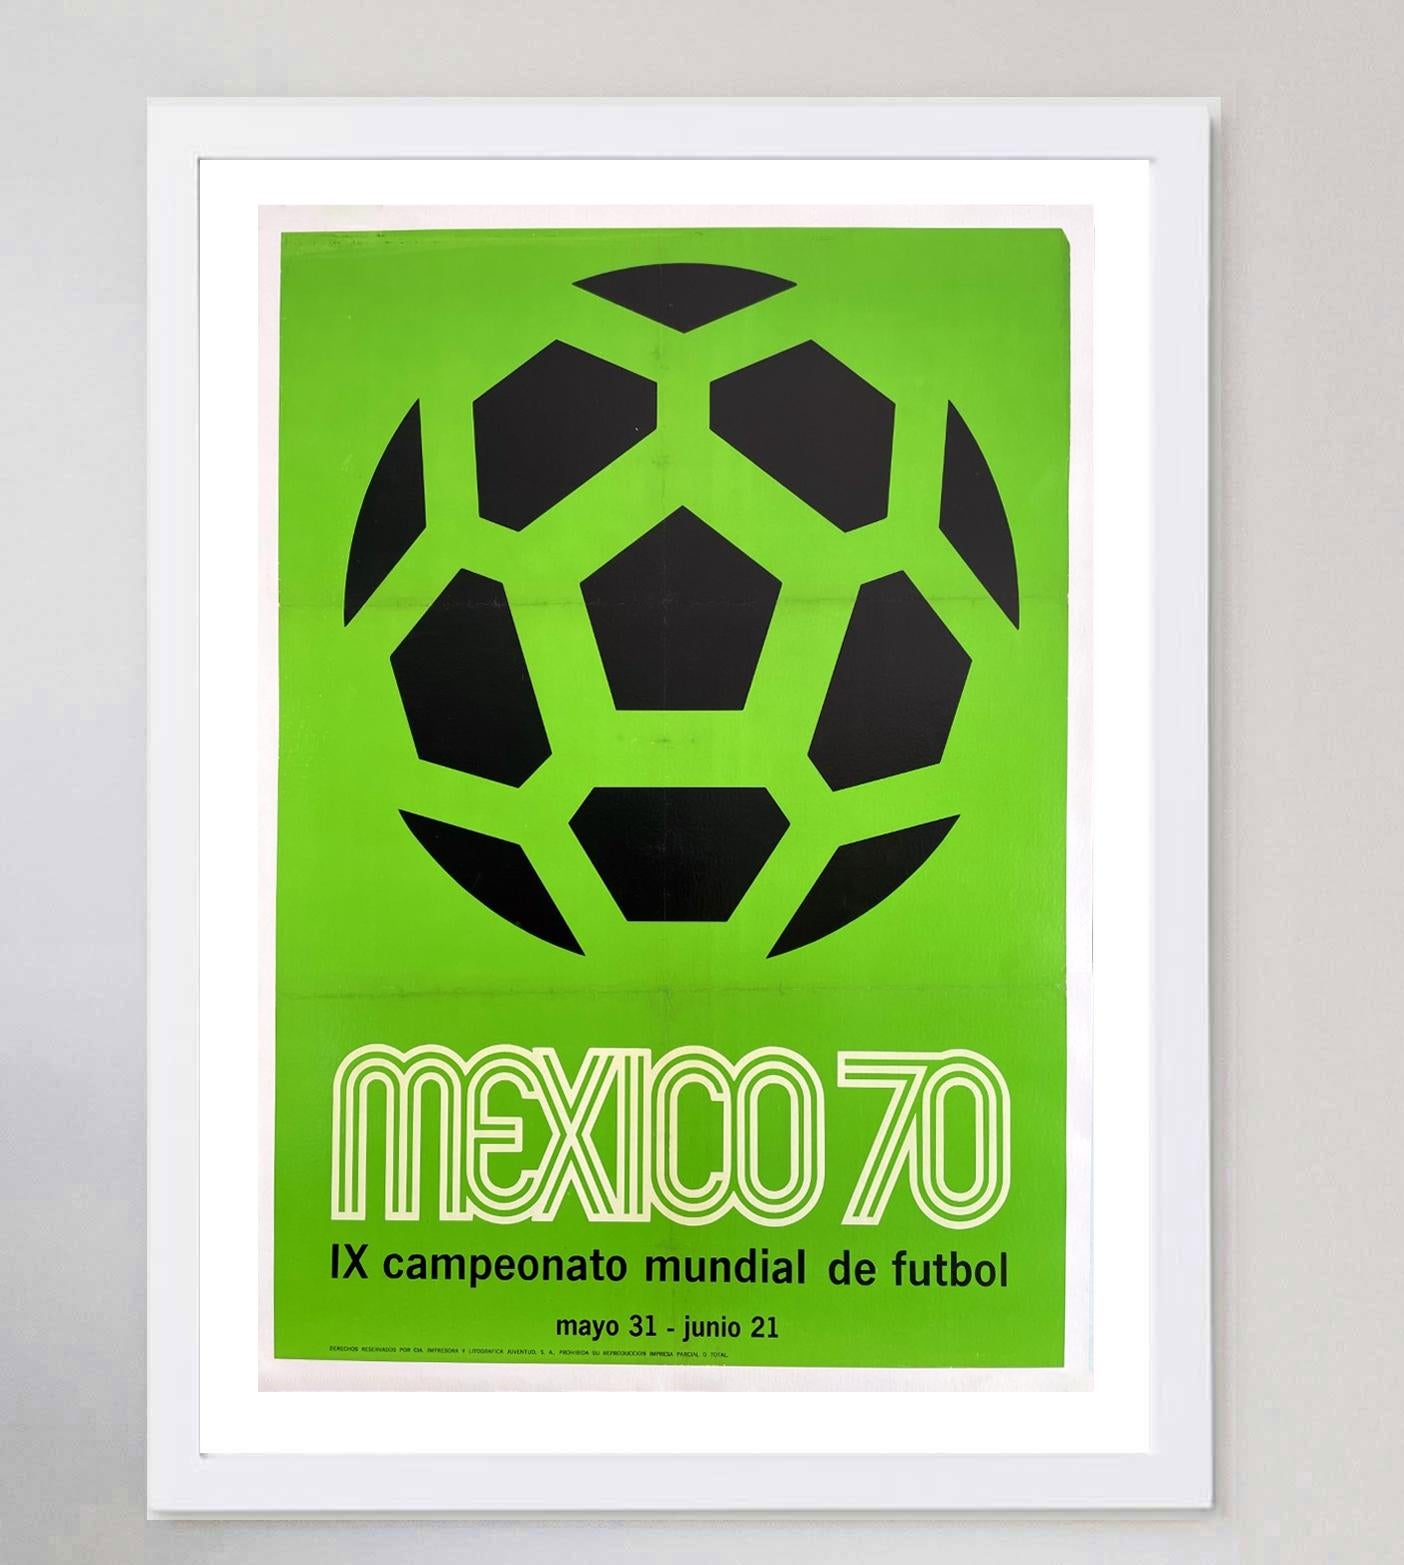 1970 world cup poster